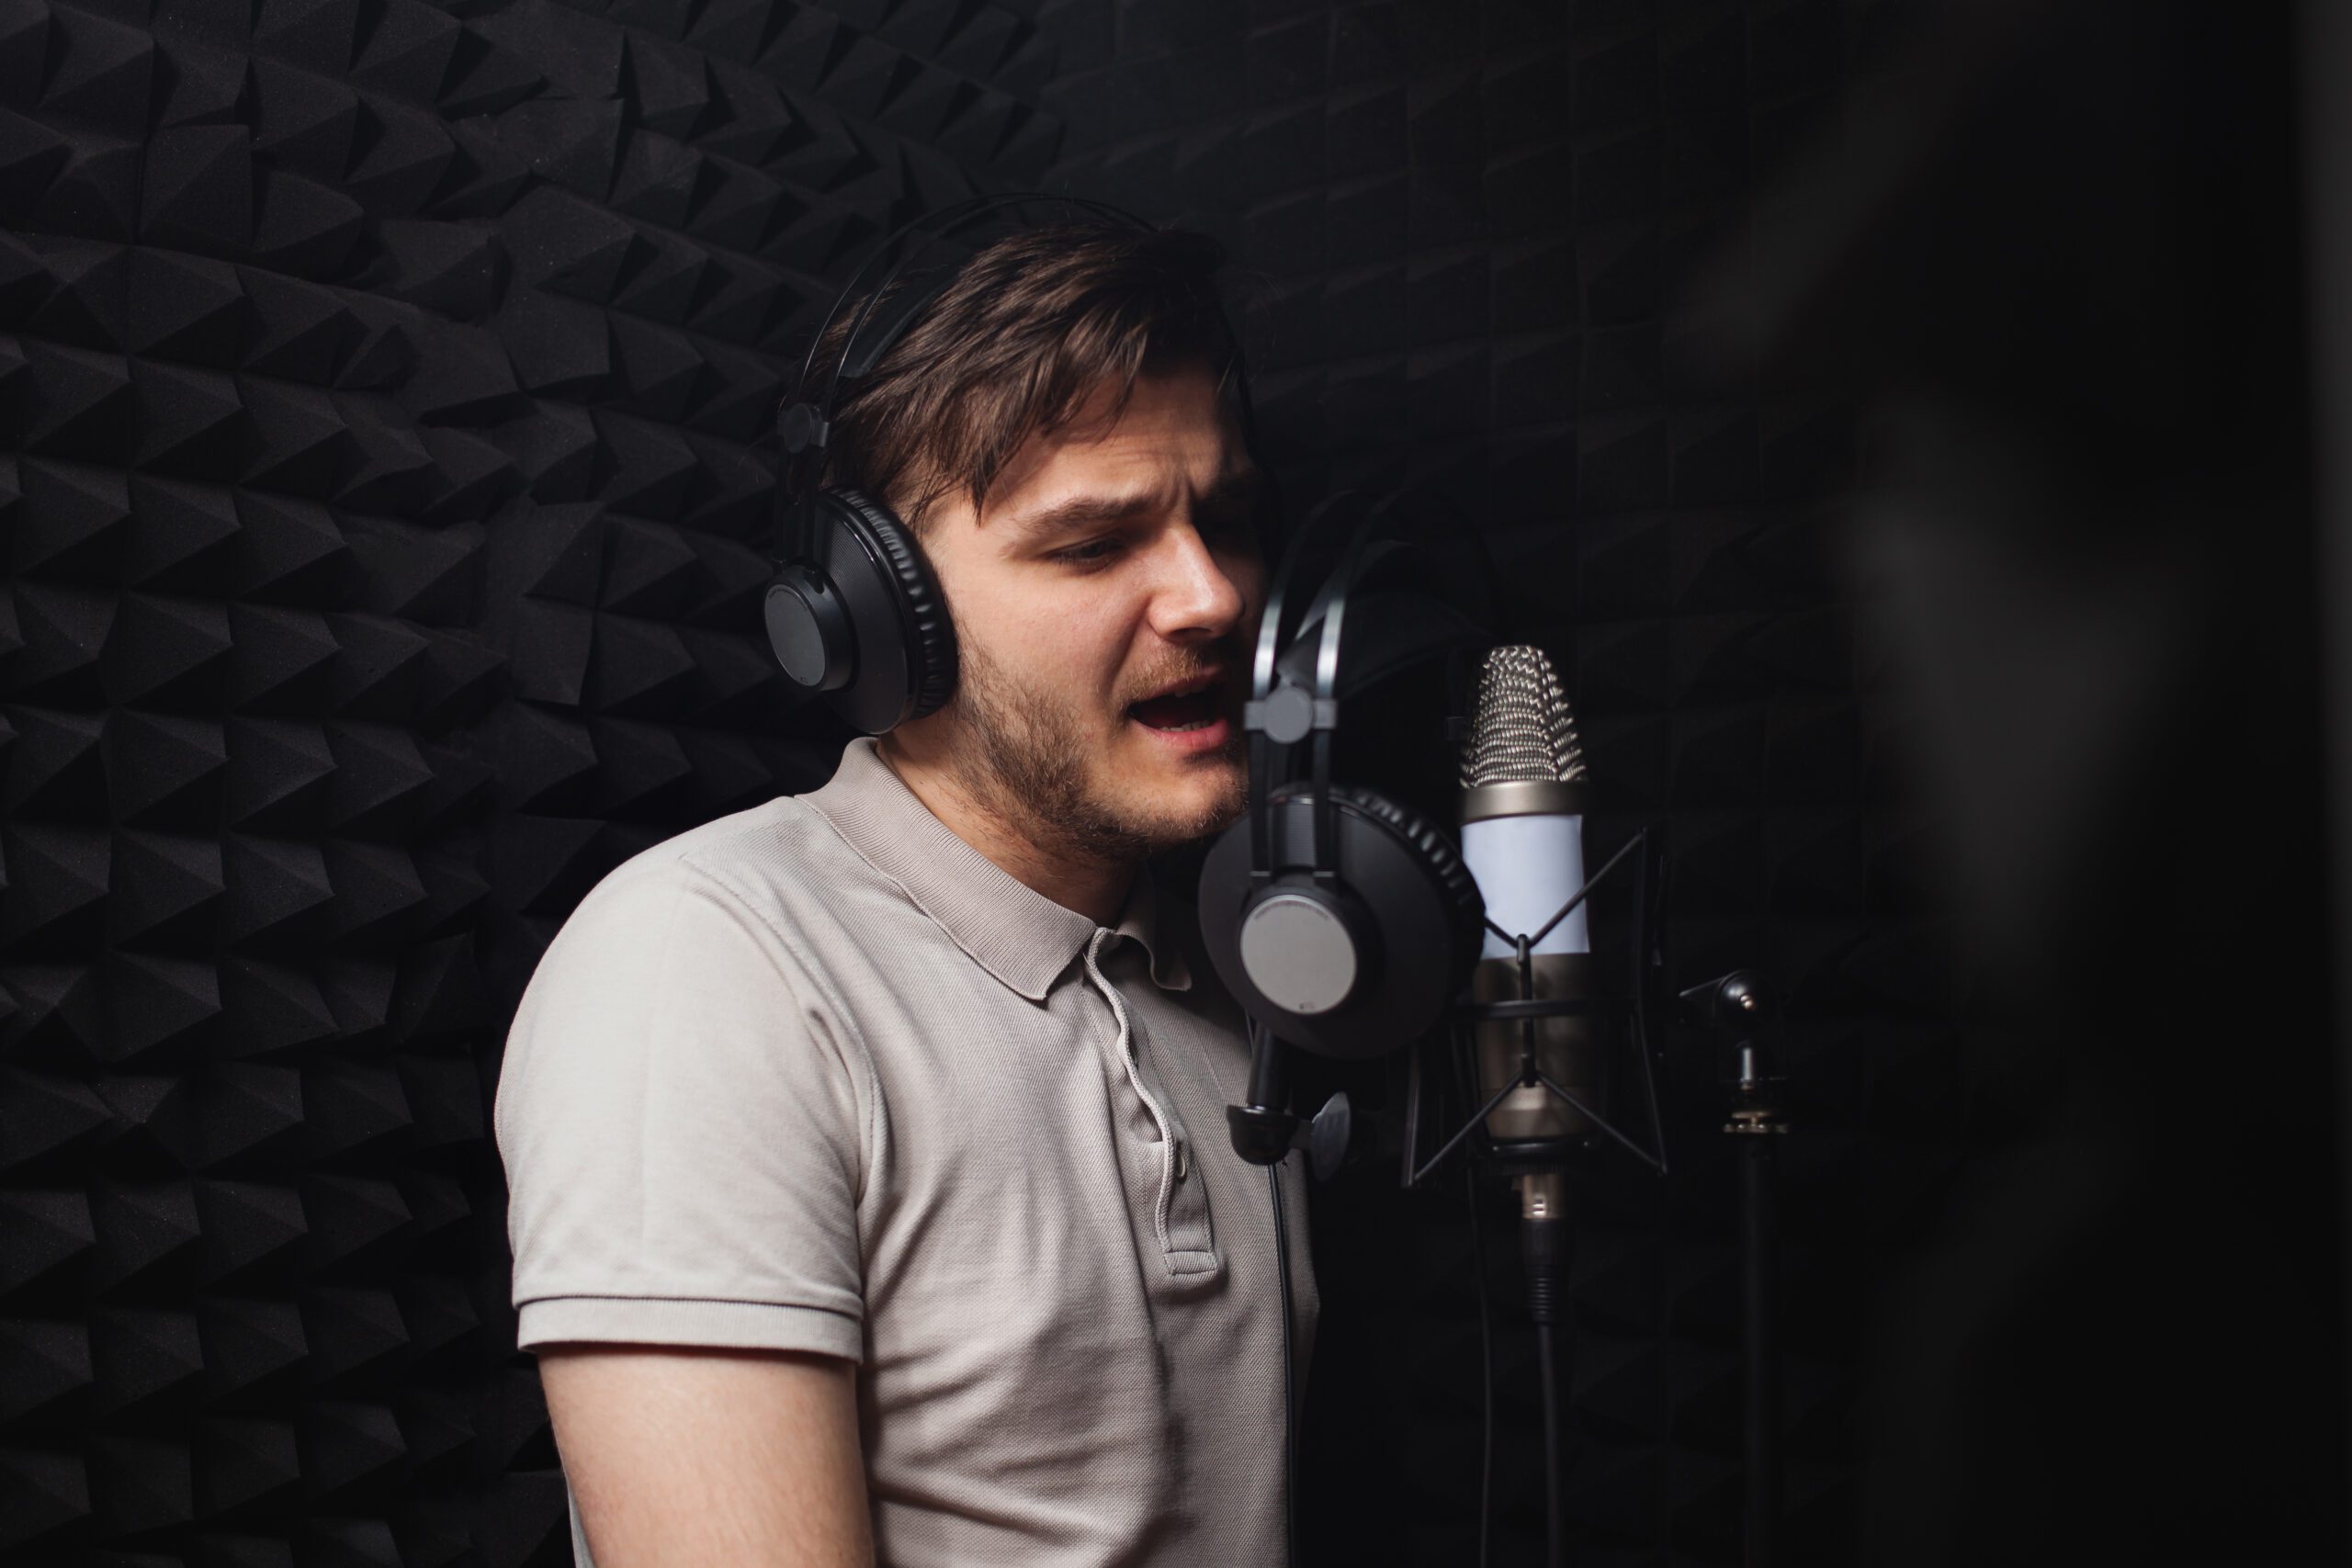 man sings into microphone, professional recording studio, headphones. Black soft walls, sound insulation. singer records his song.